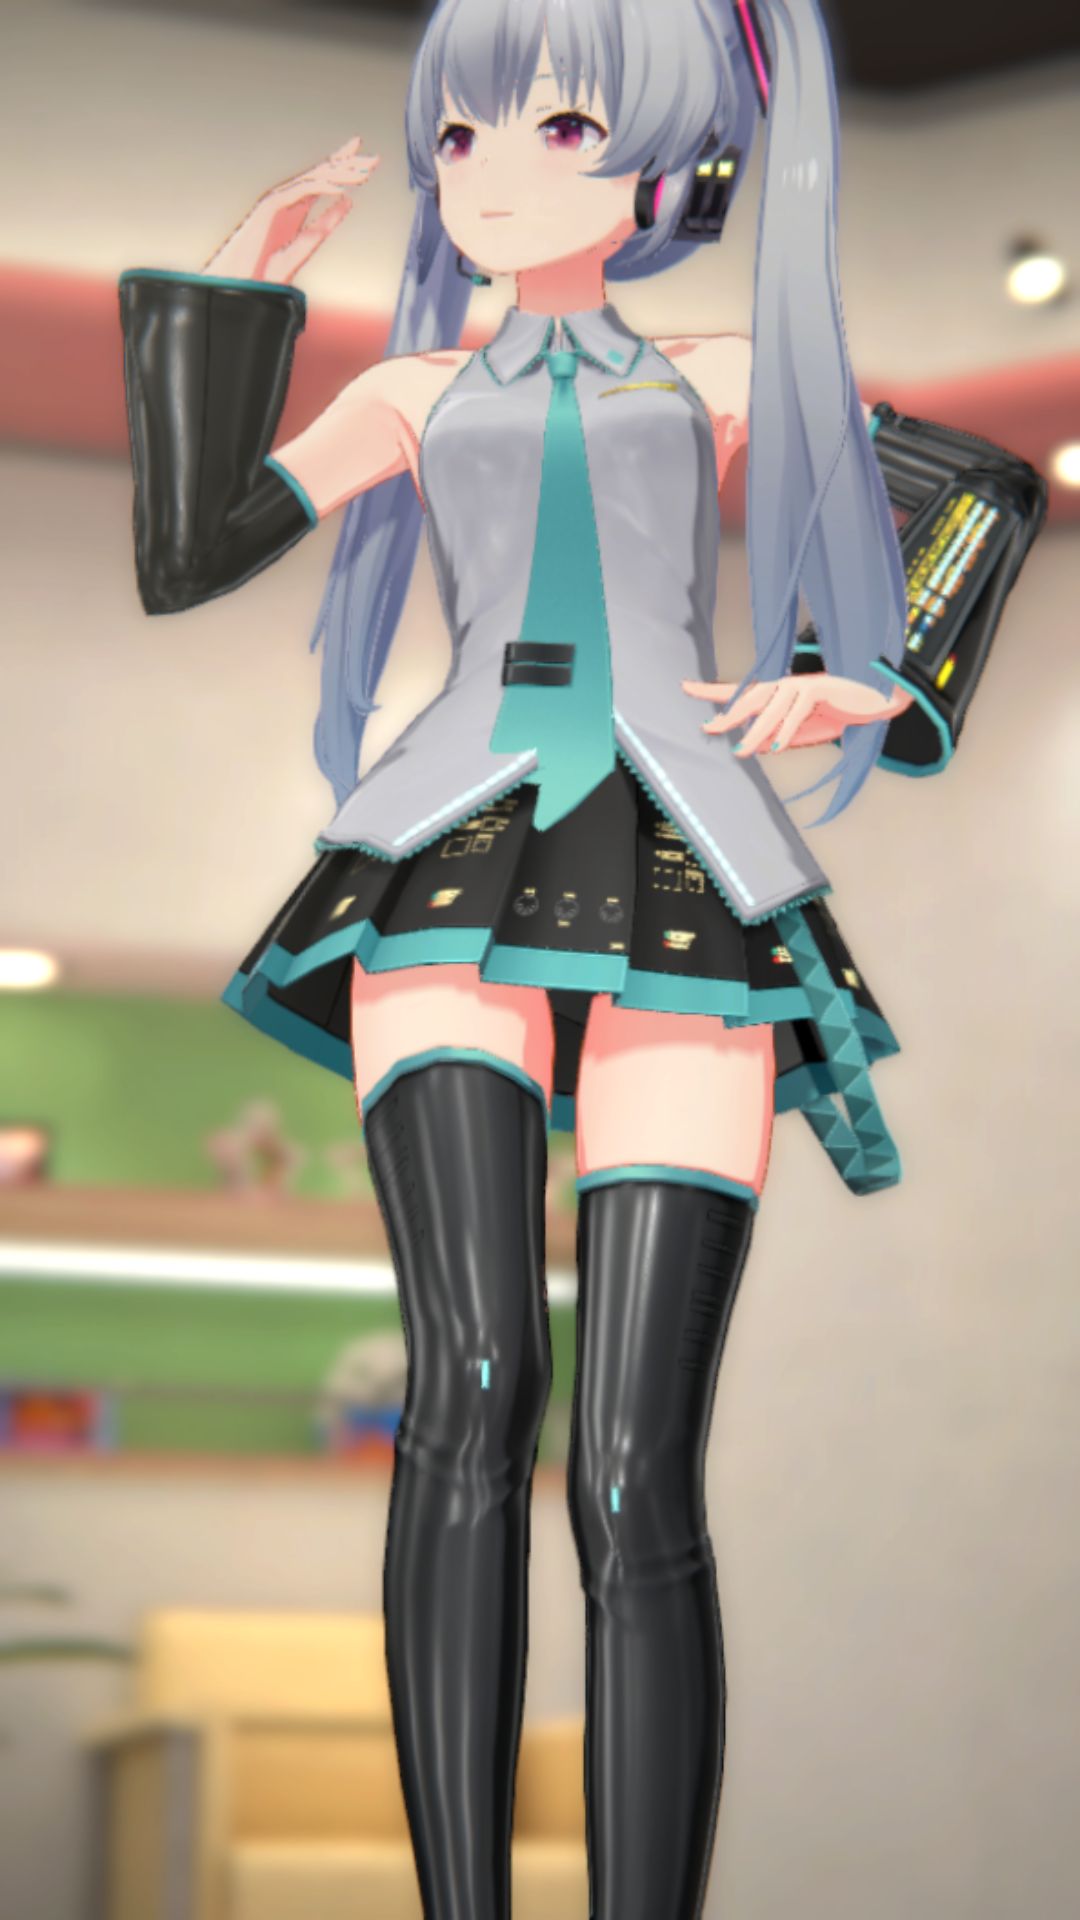 The result of peeking into the contents of the skirt of the smartphone game "IDOLY PRIDE" Hatsune Miku and Hatsune Miku costume 5